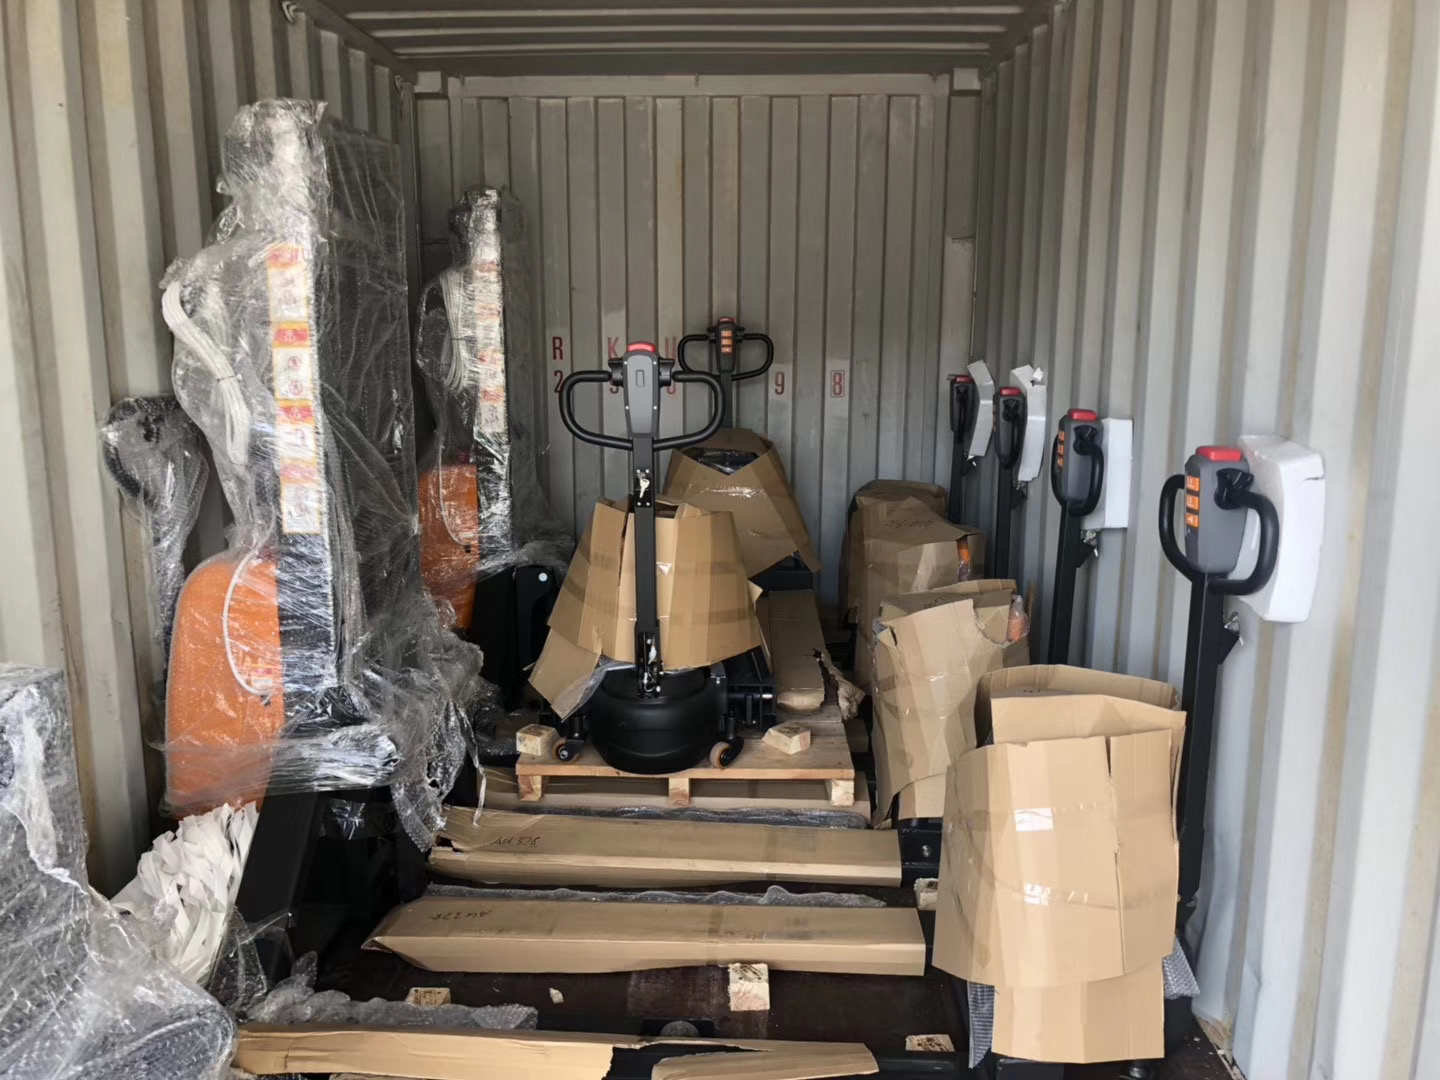 10 units VG-EPT20W ELECTRIC PALLET TRUCK (EPT*W) (WALKIE TYPE) going to supermarket in south africa